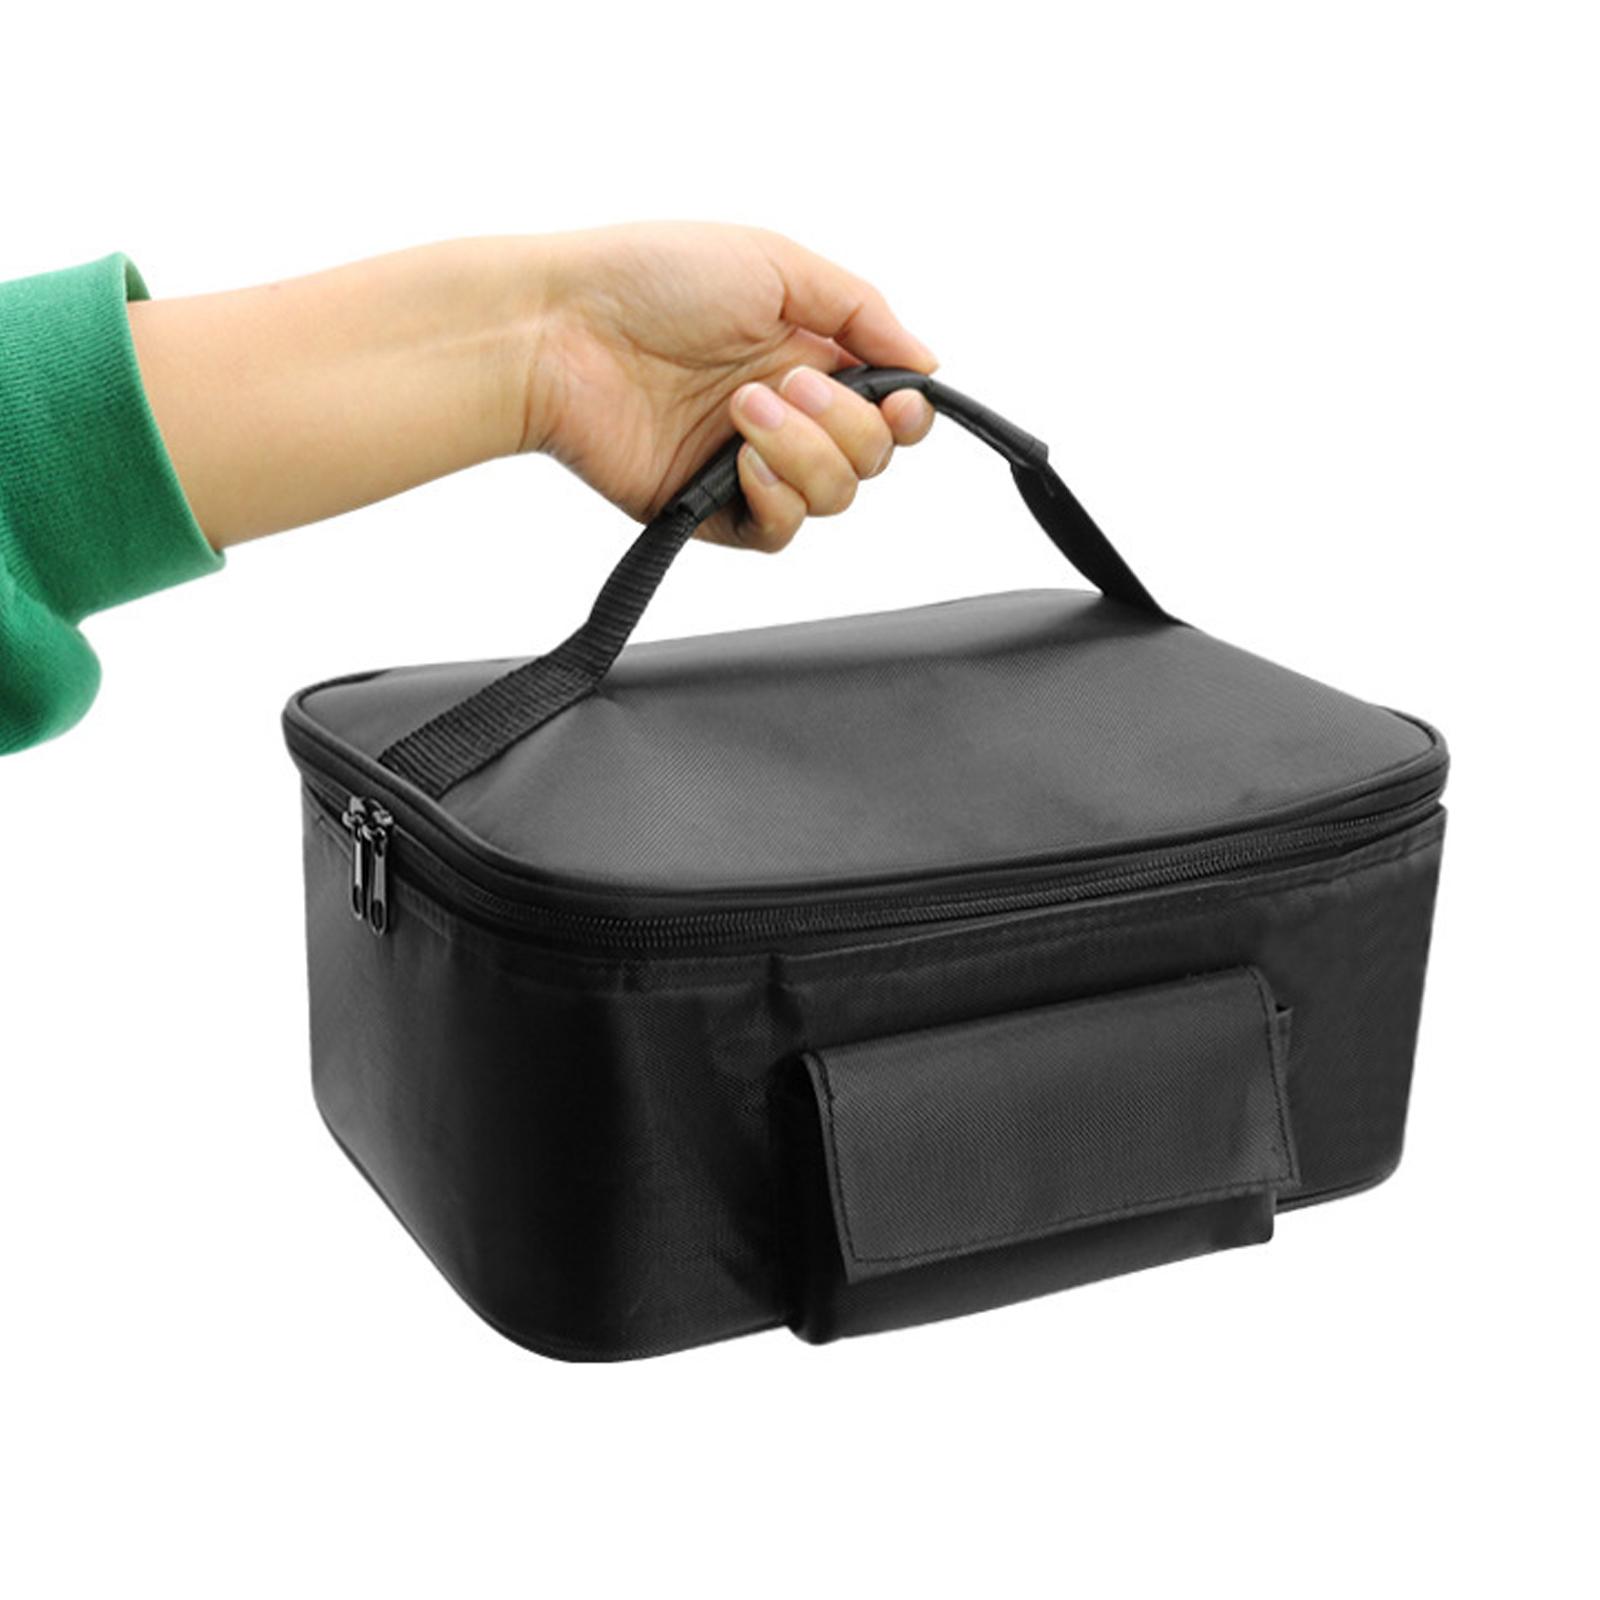 Portable Mini Microwave 12v Heated Electric Lunch Pouch Food Warmer for Car